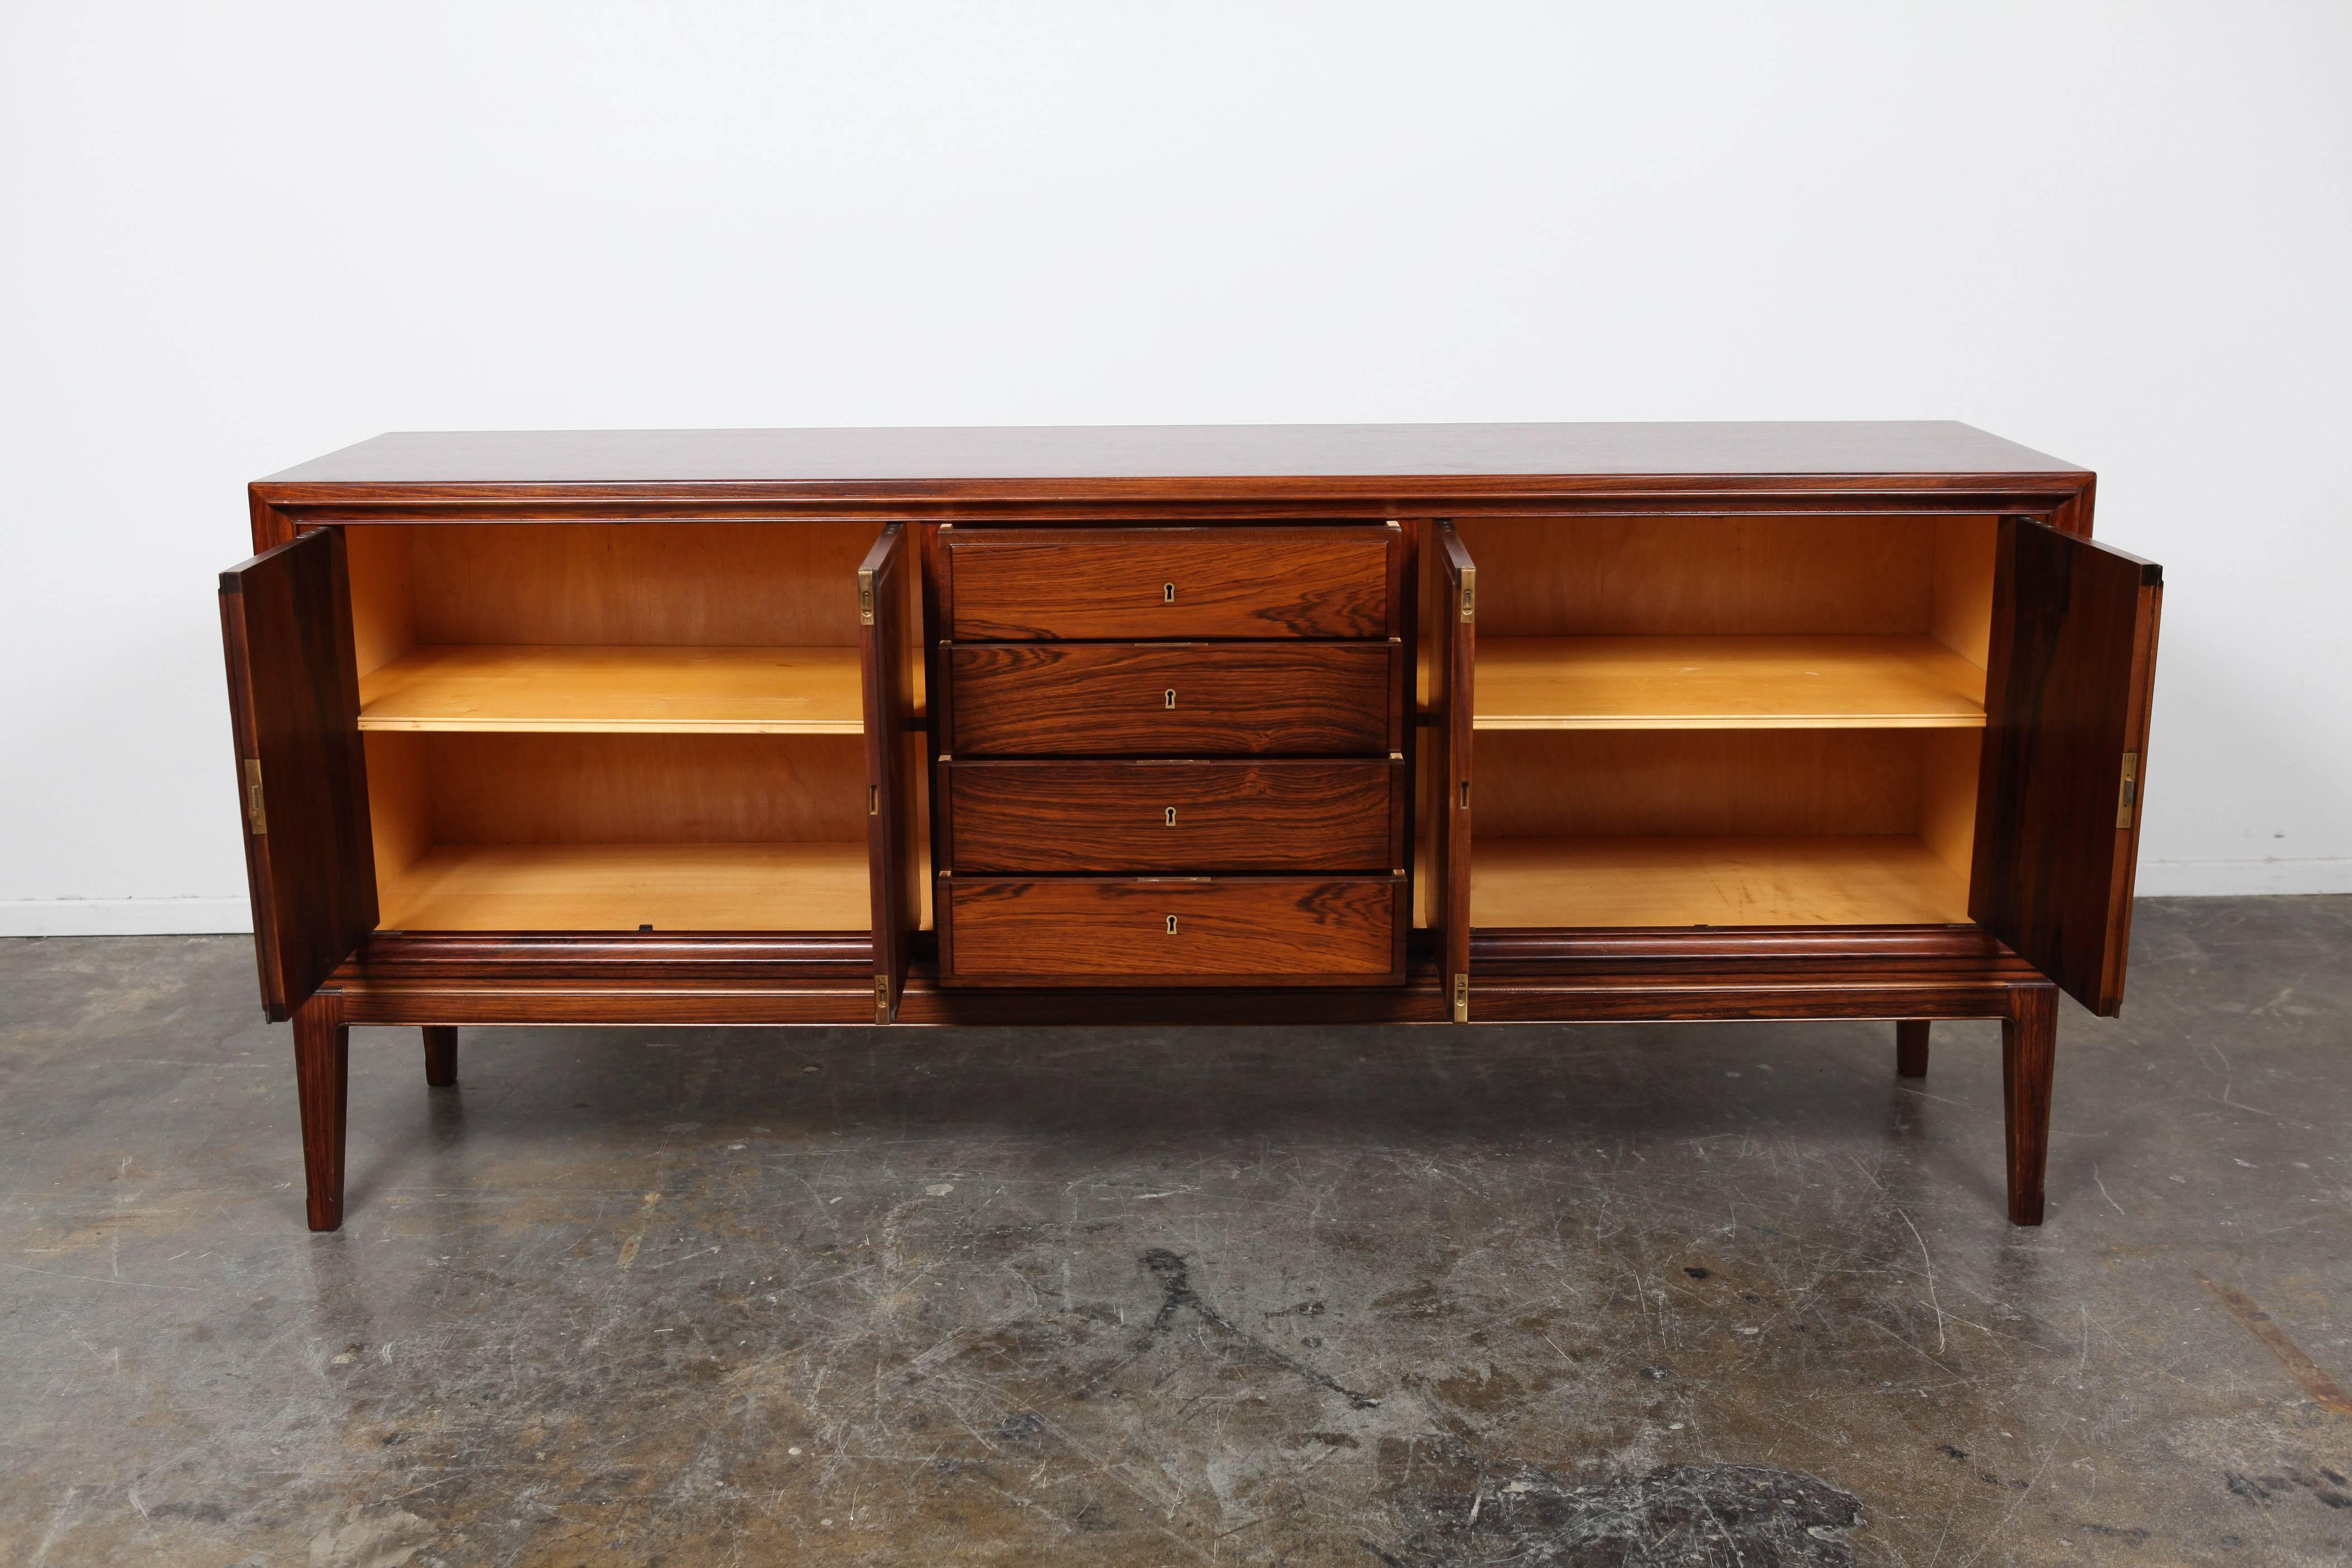 Mid-Century Danish Modern rosewood sideboard with clean lines and bookmatched wood grain. This piece has four locking drawers and two side cabinets with a single interior shelf.